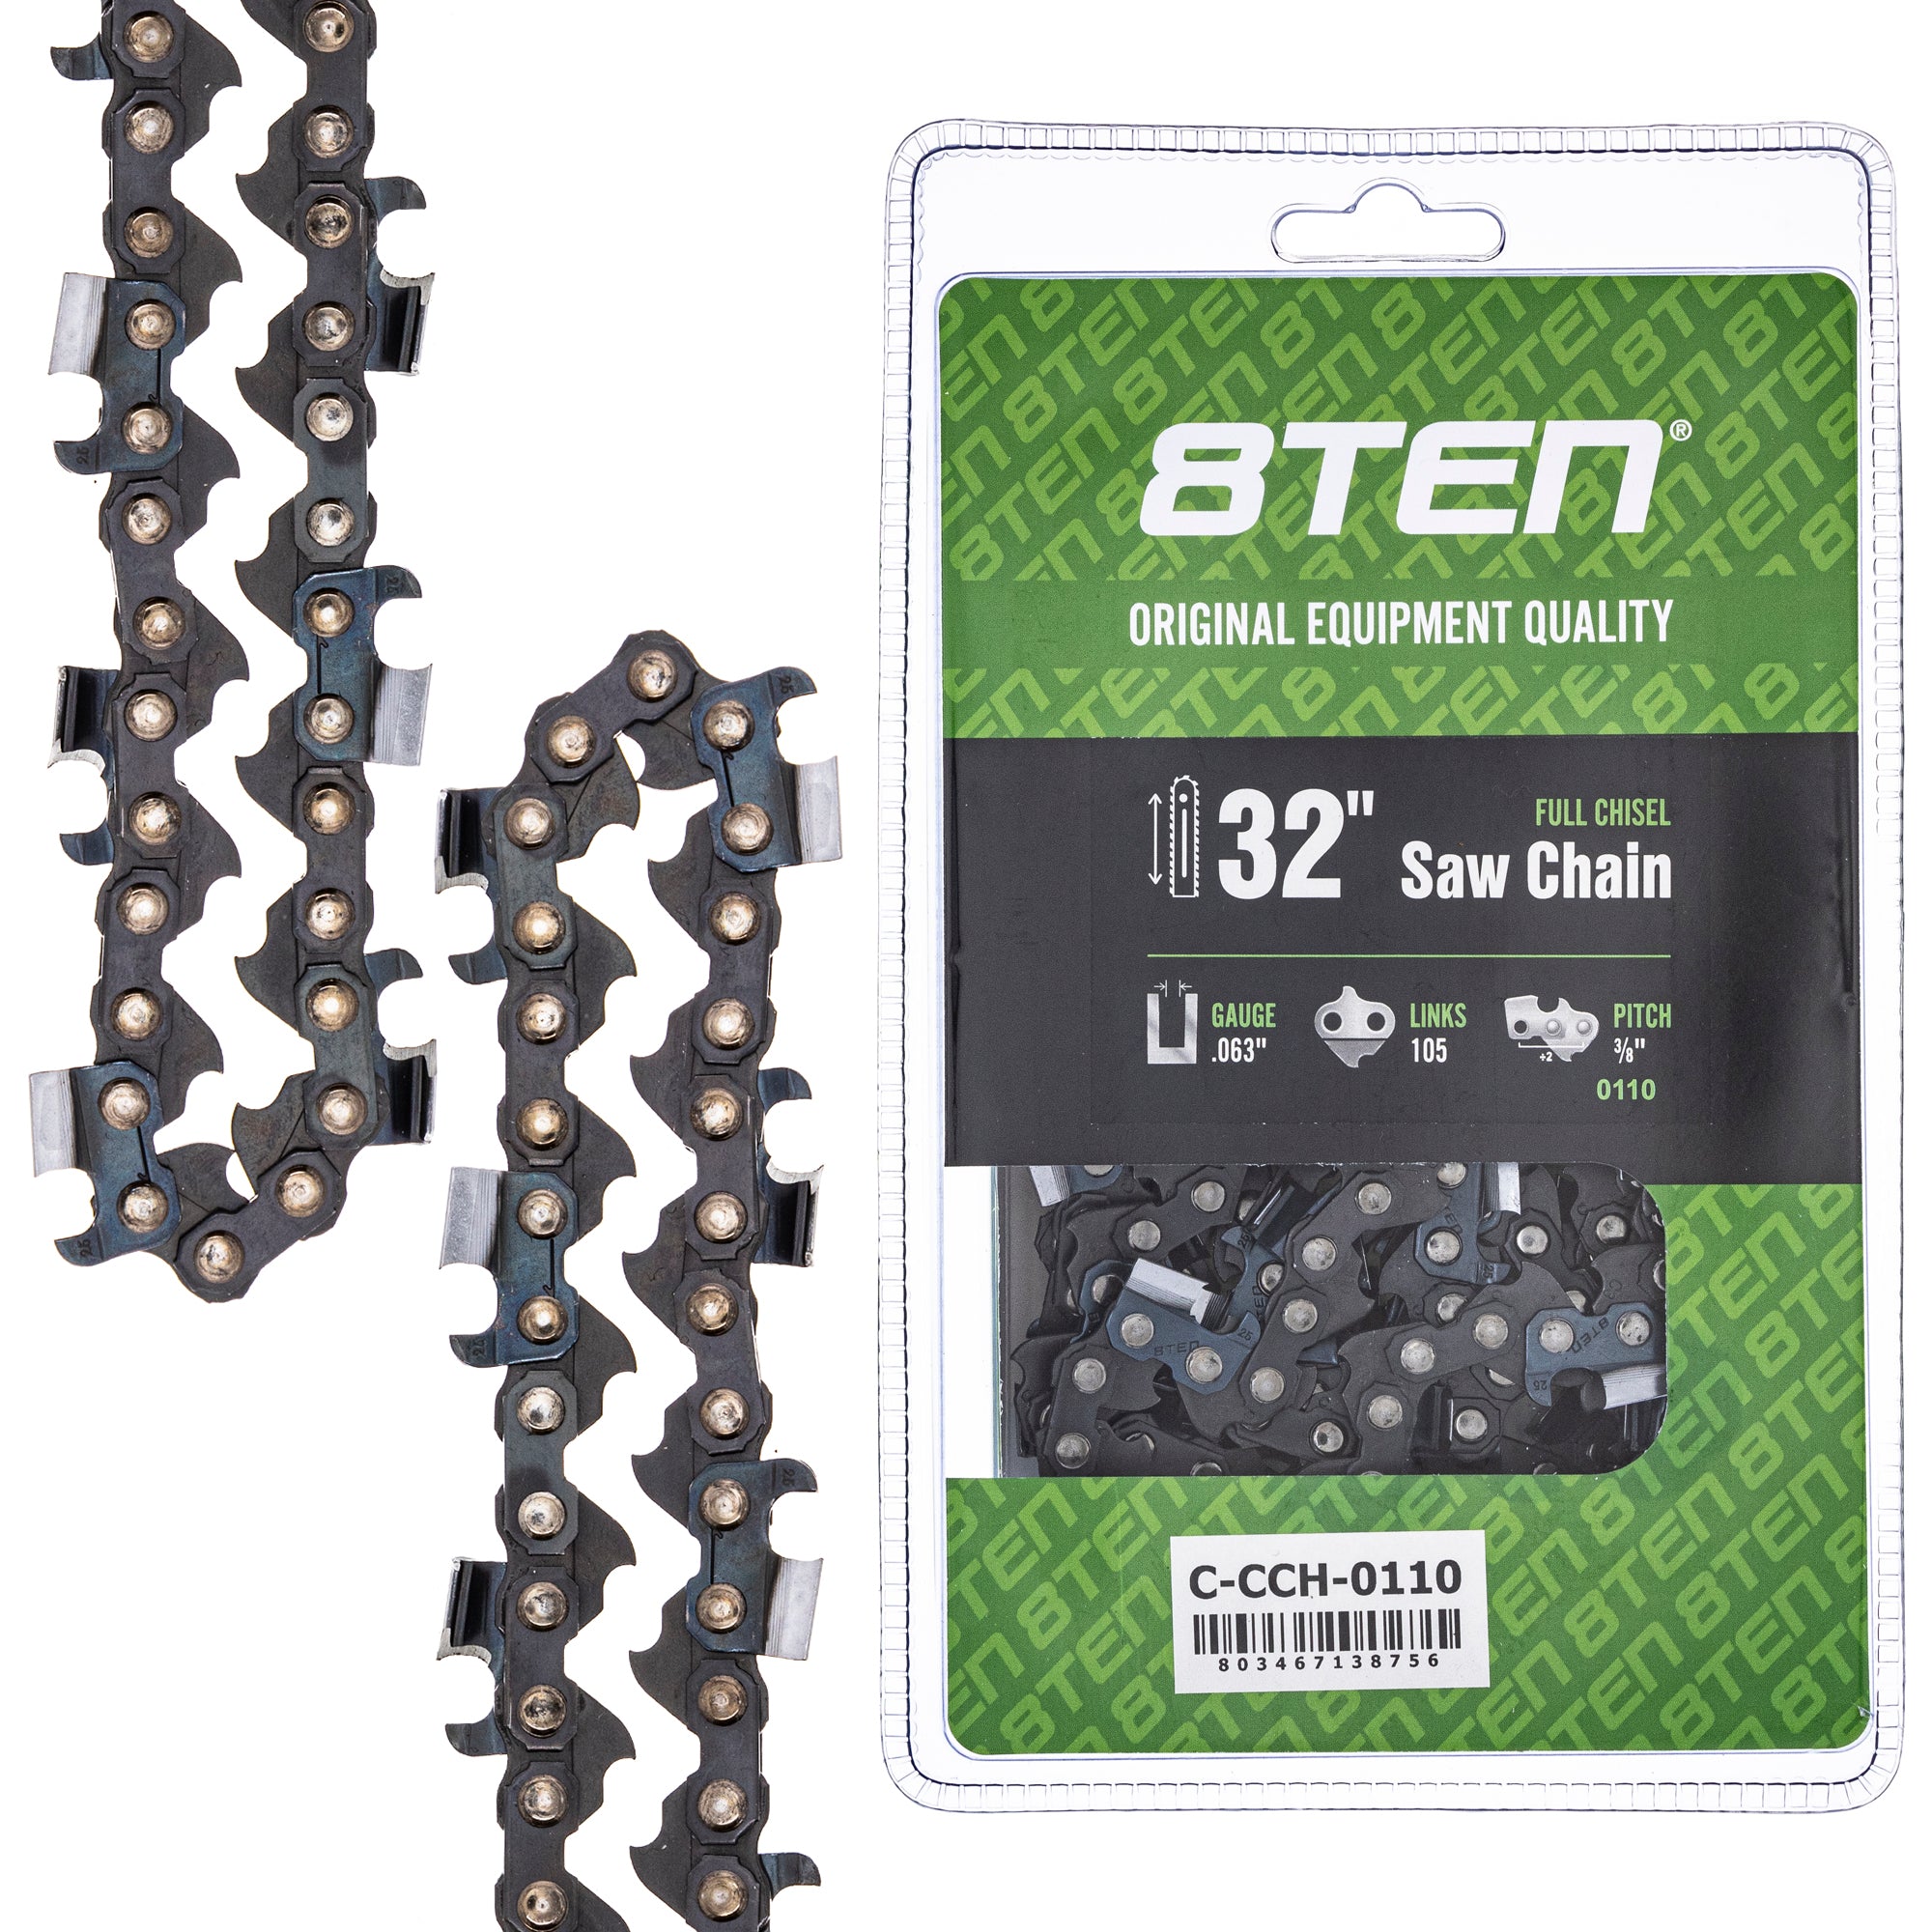 Chainsaw Chain 32 Inch .063 3/8 105DL for zOTHER Oregon XL VI Super PS 8TEN 810-CCC2332H